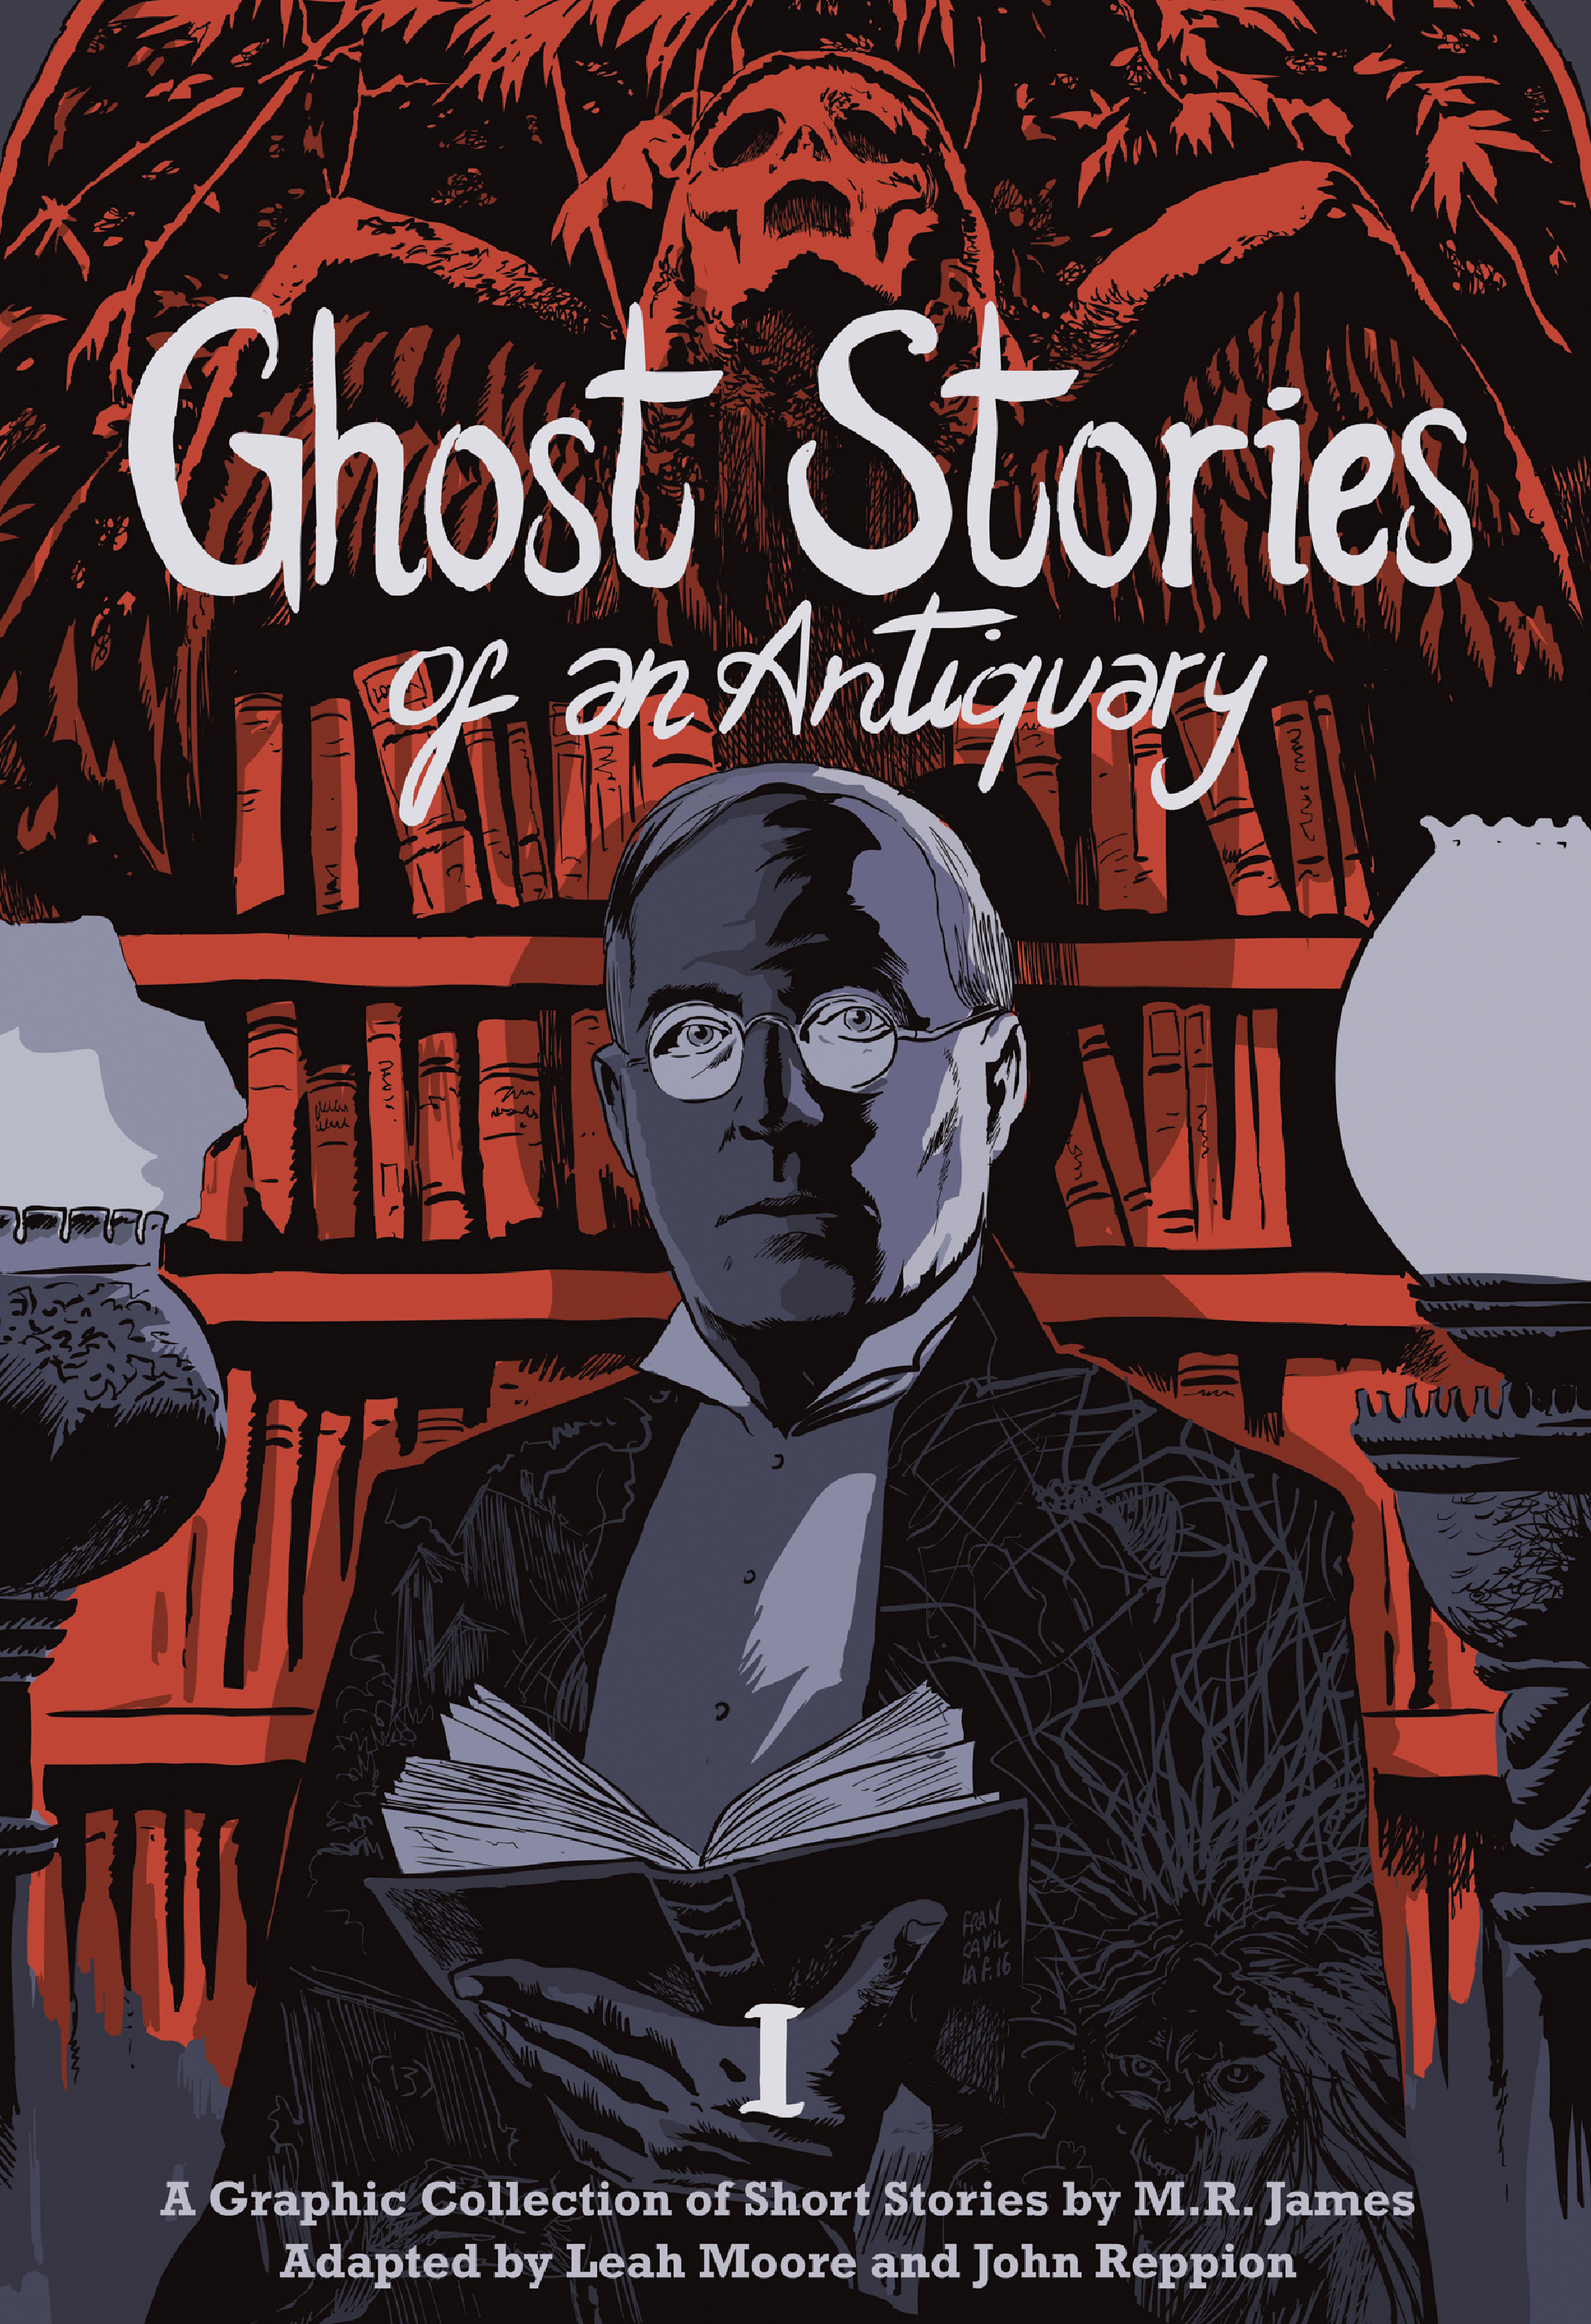 Read online Ghost Stories of an Antiquary comic -  Issue # TPB 1 - 1